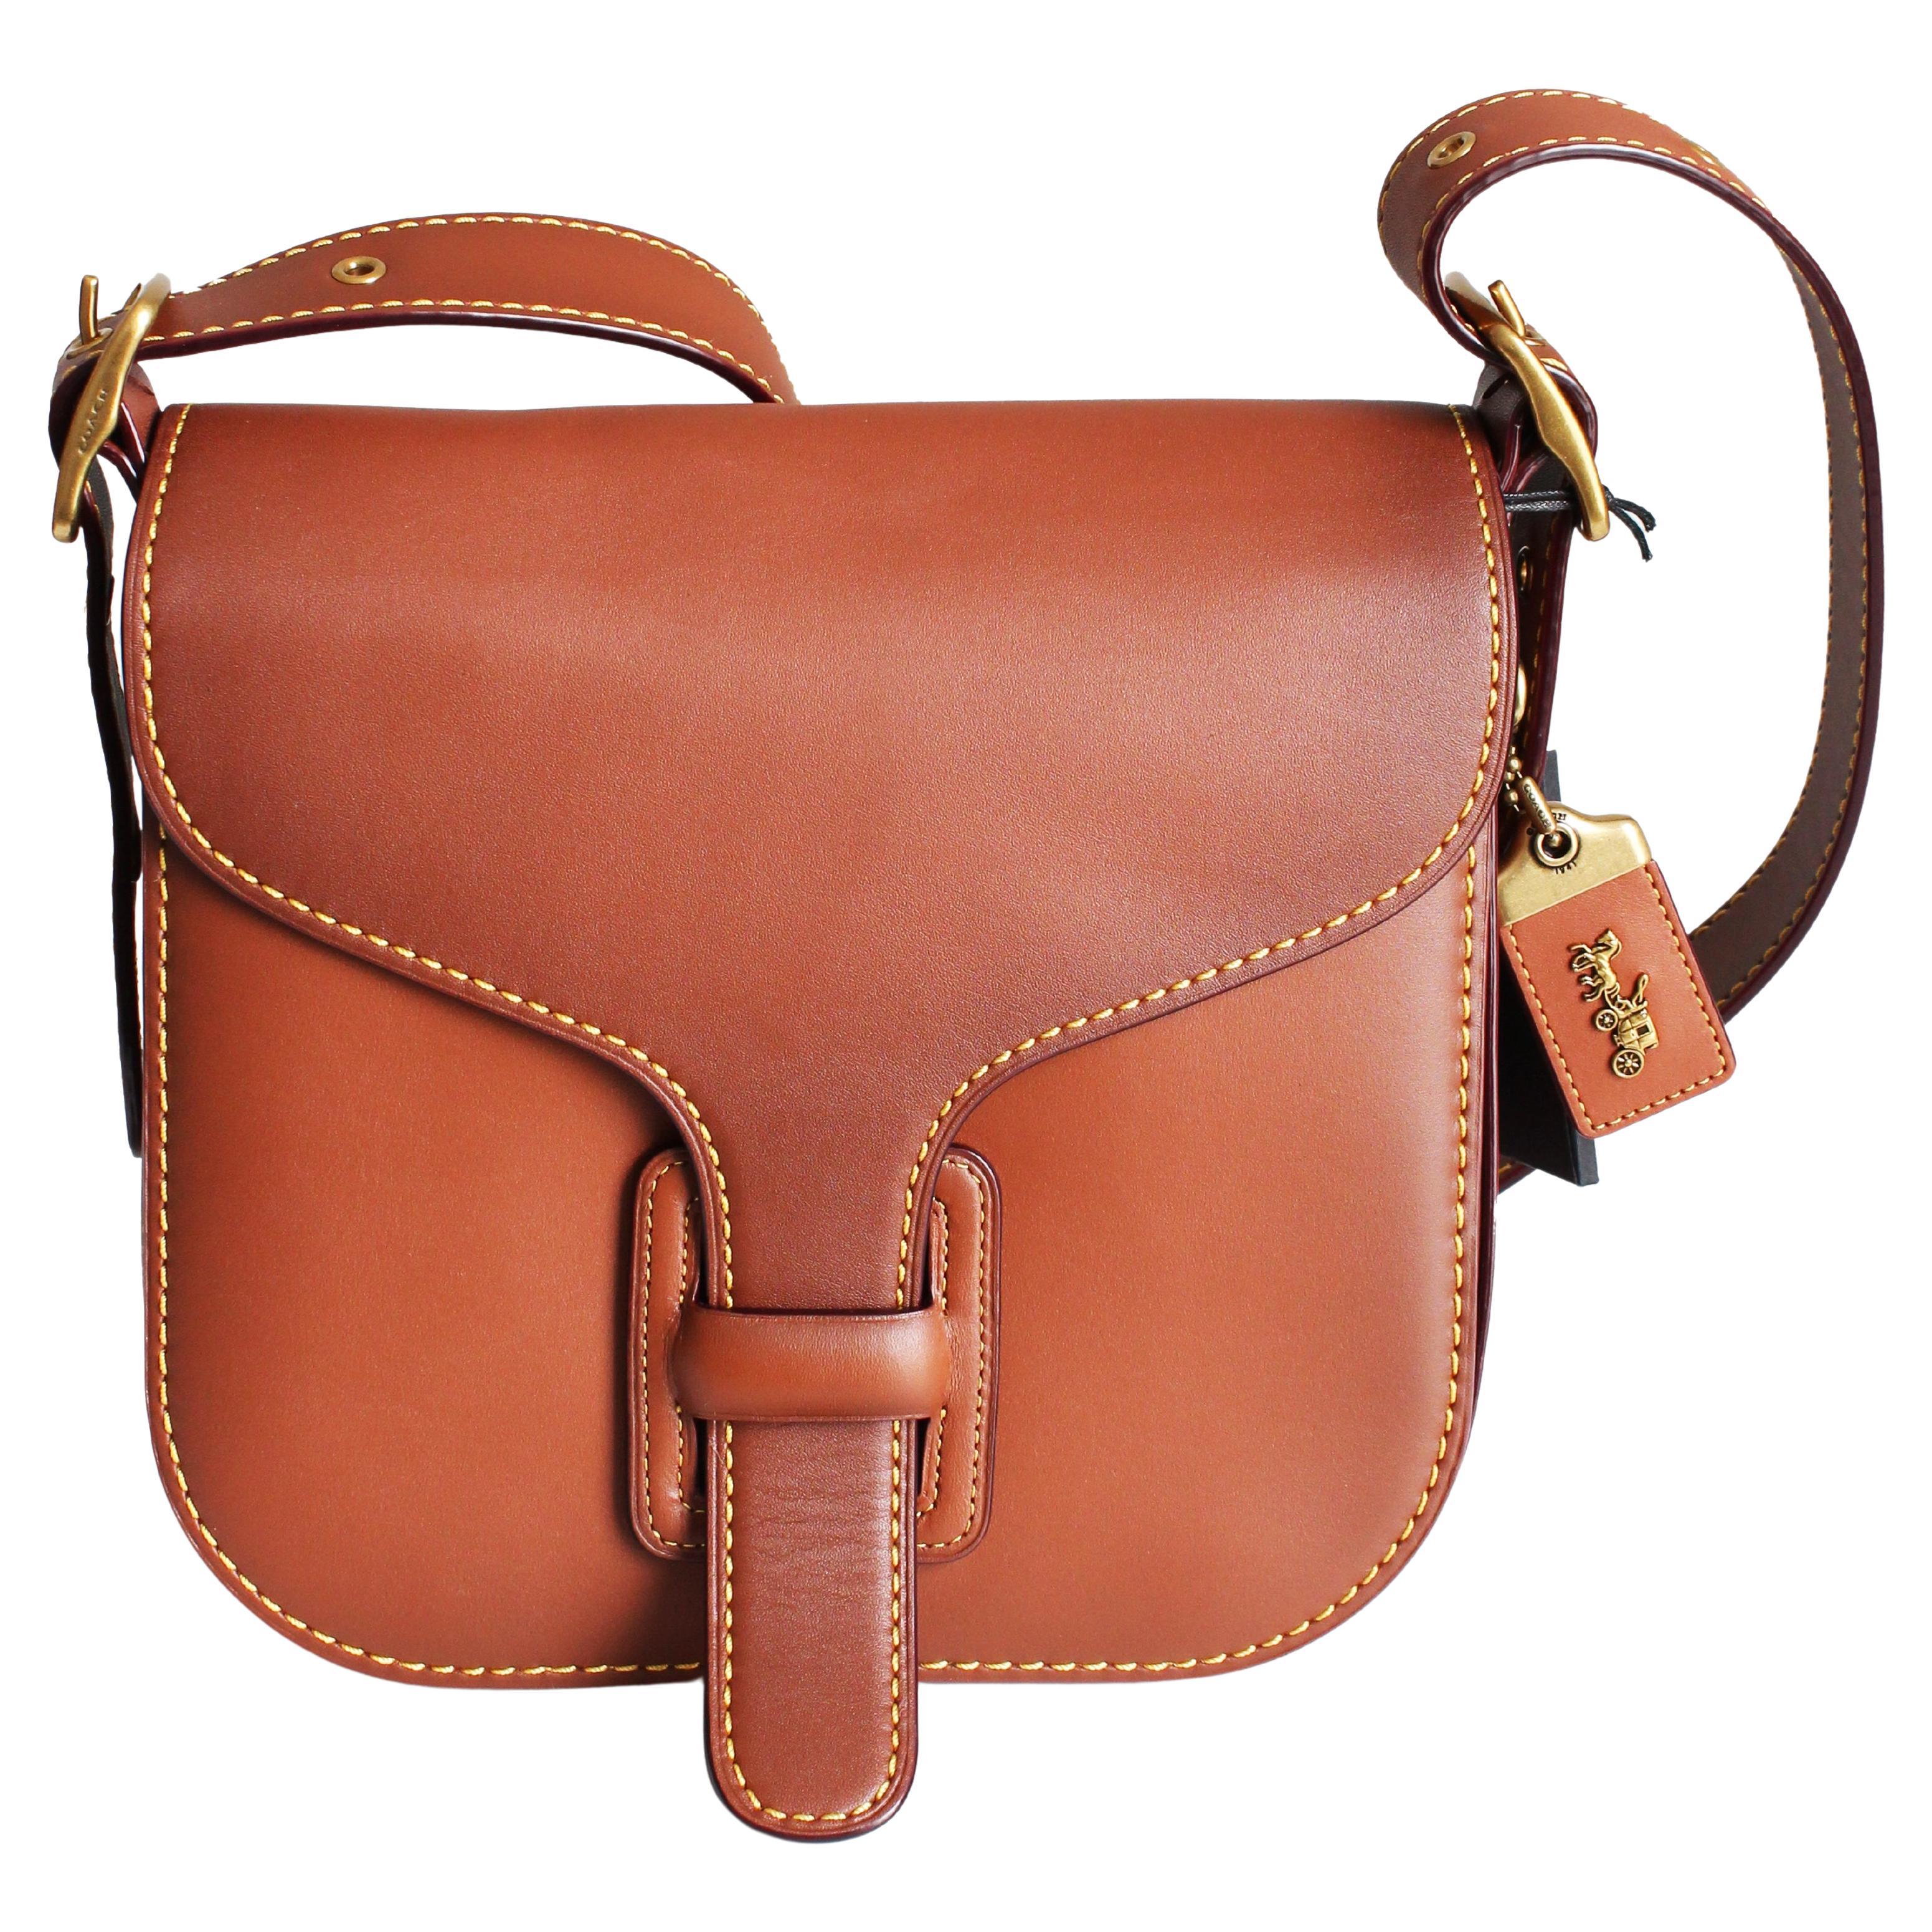 Coach Saffiano Leather Mini Satchel Will Save You From The HOT Summer